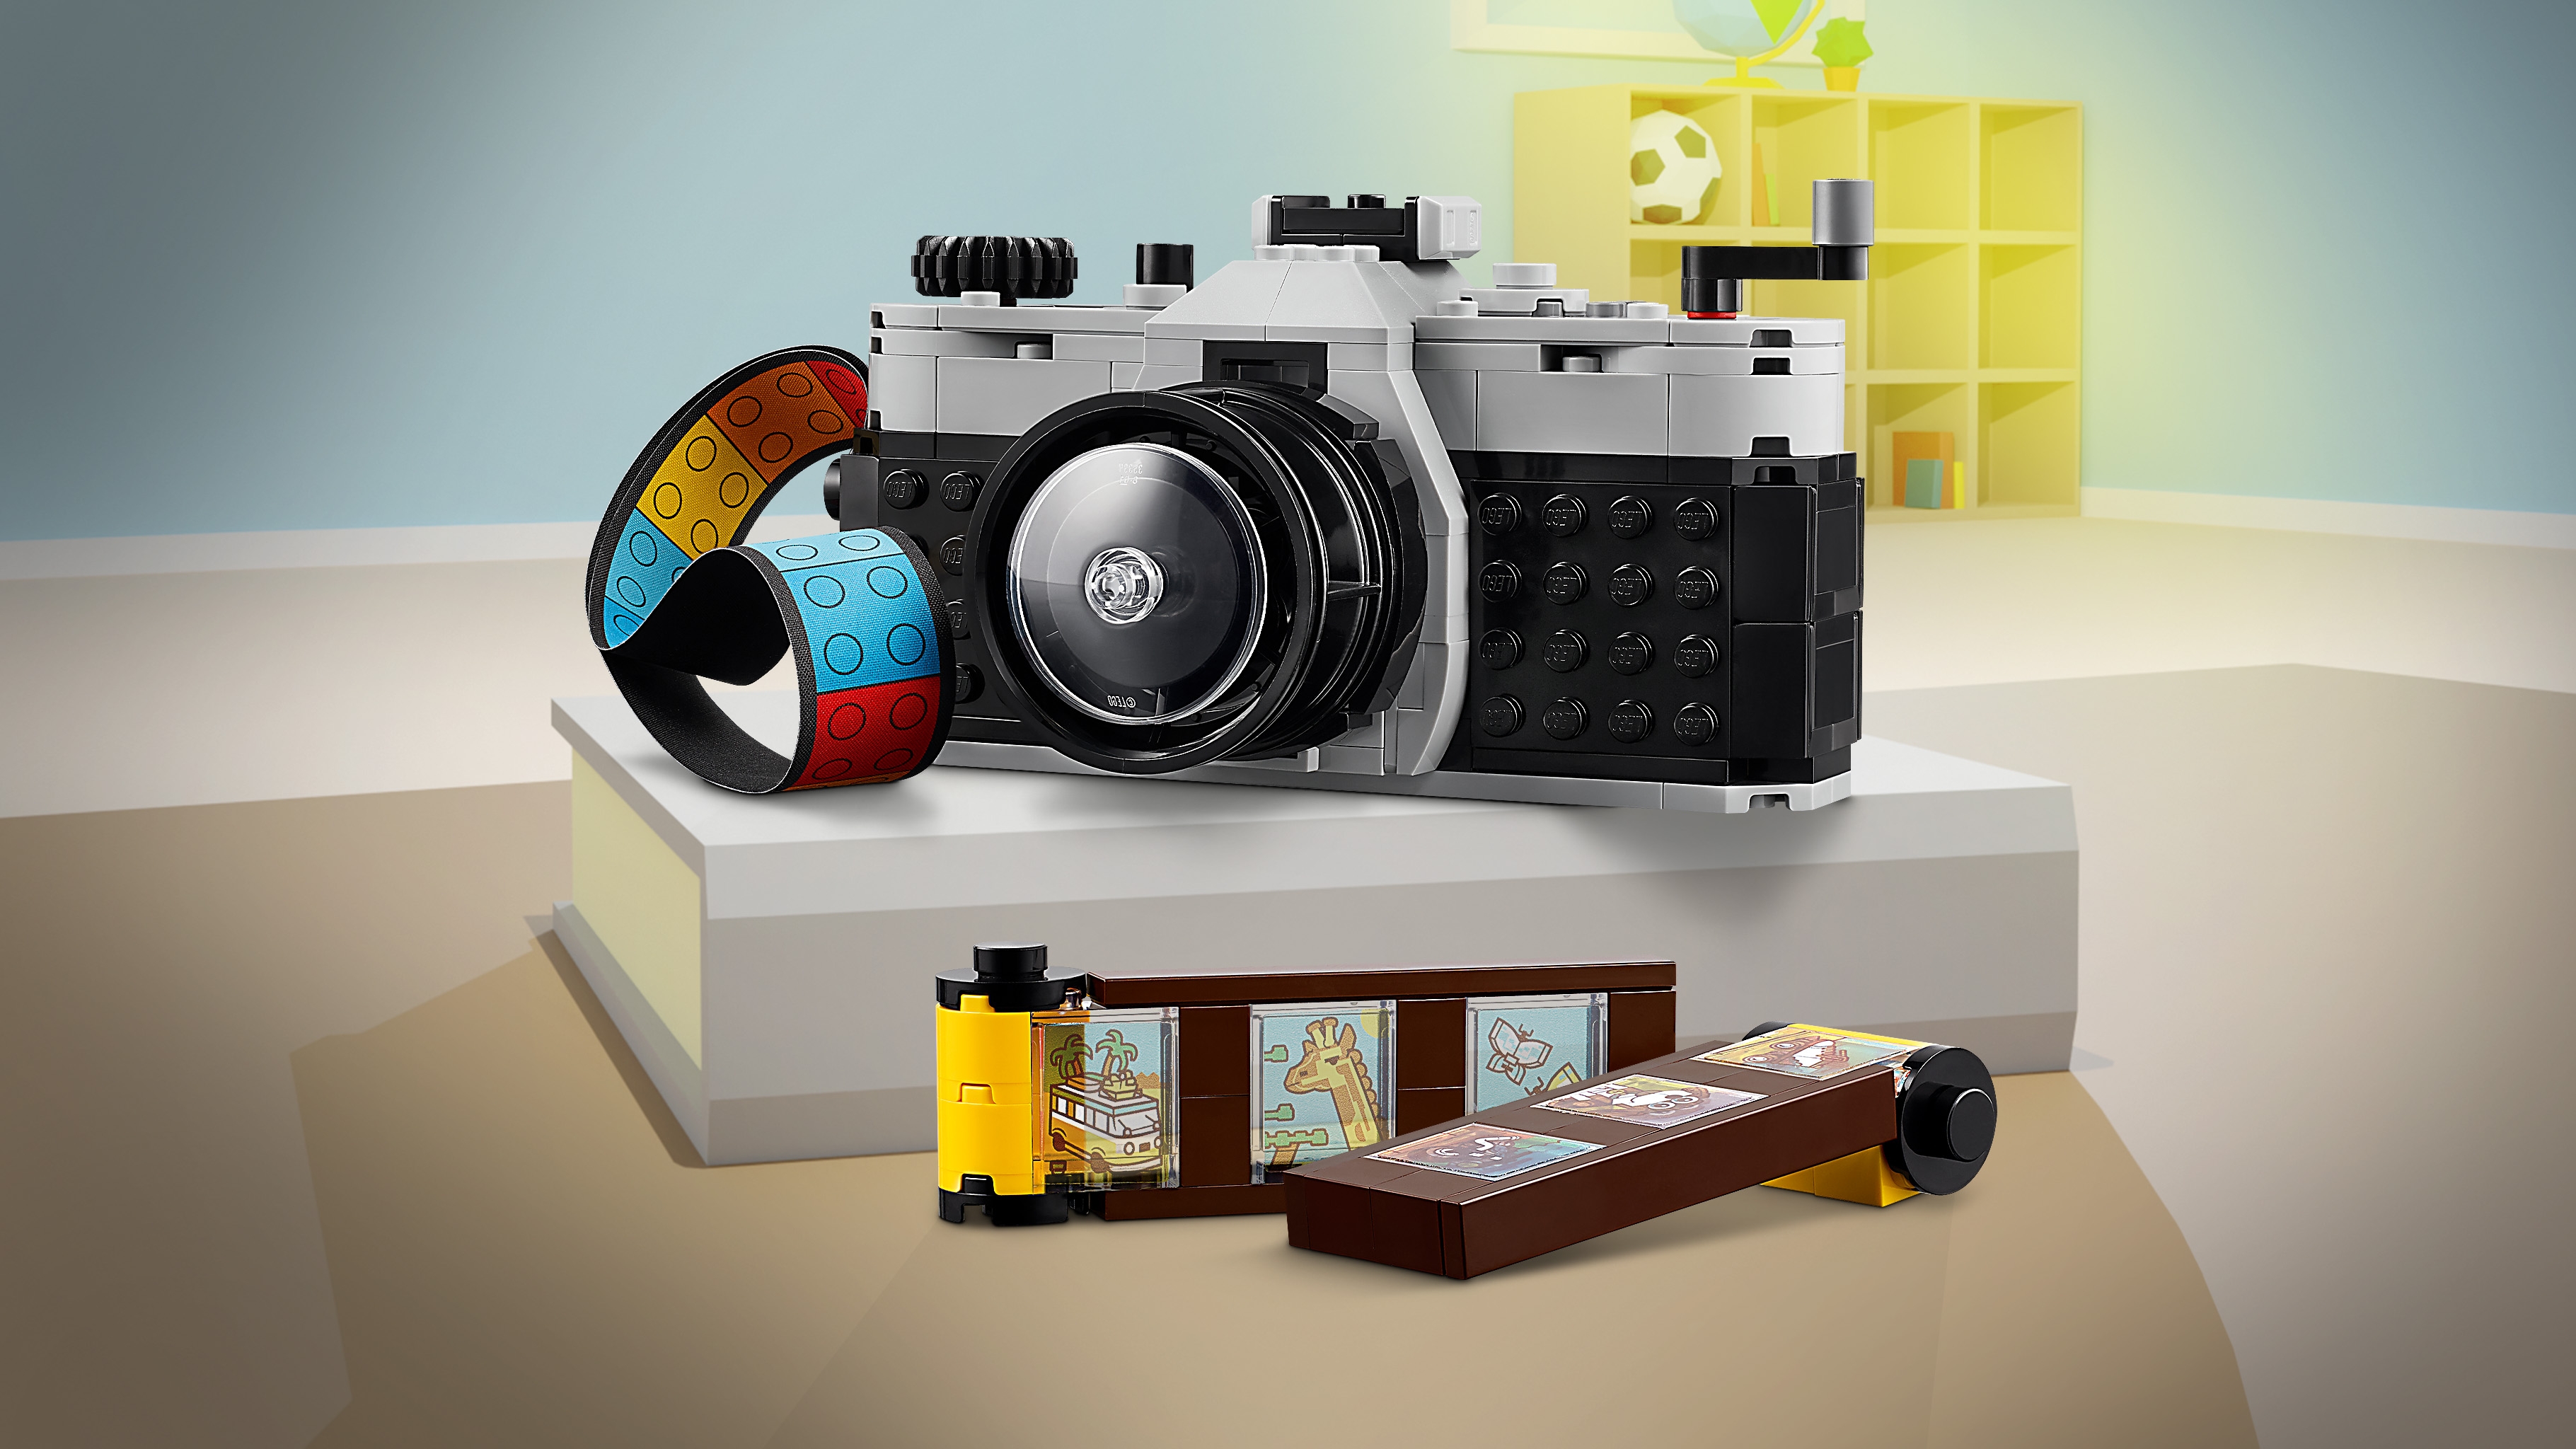 This Lego camera actually works 